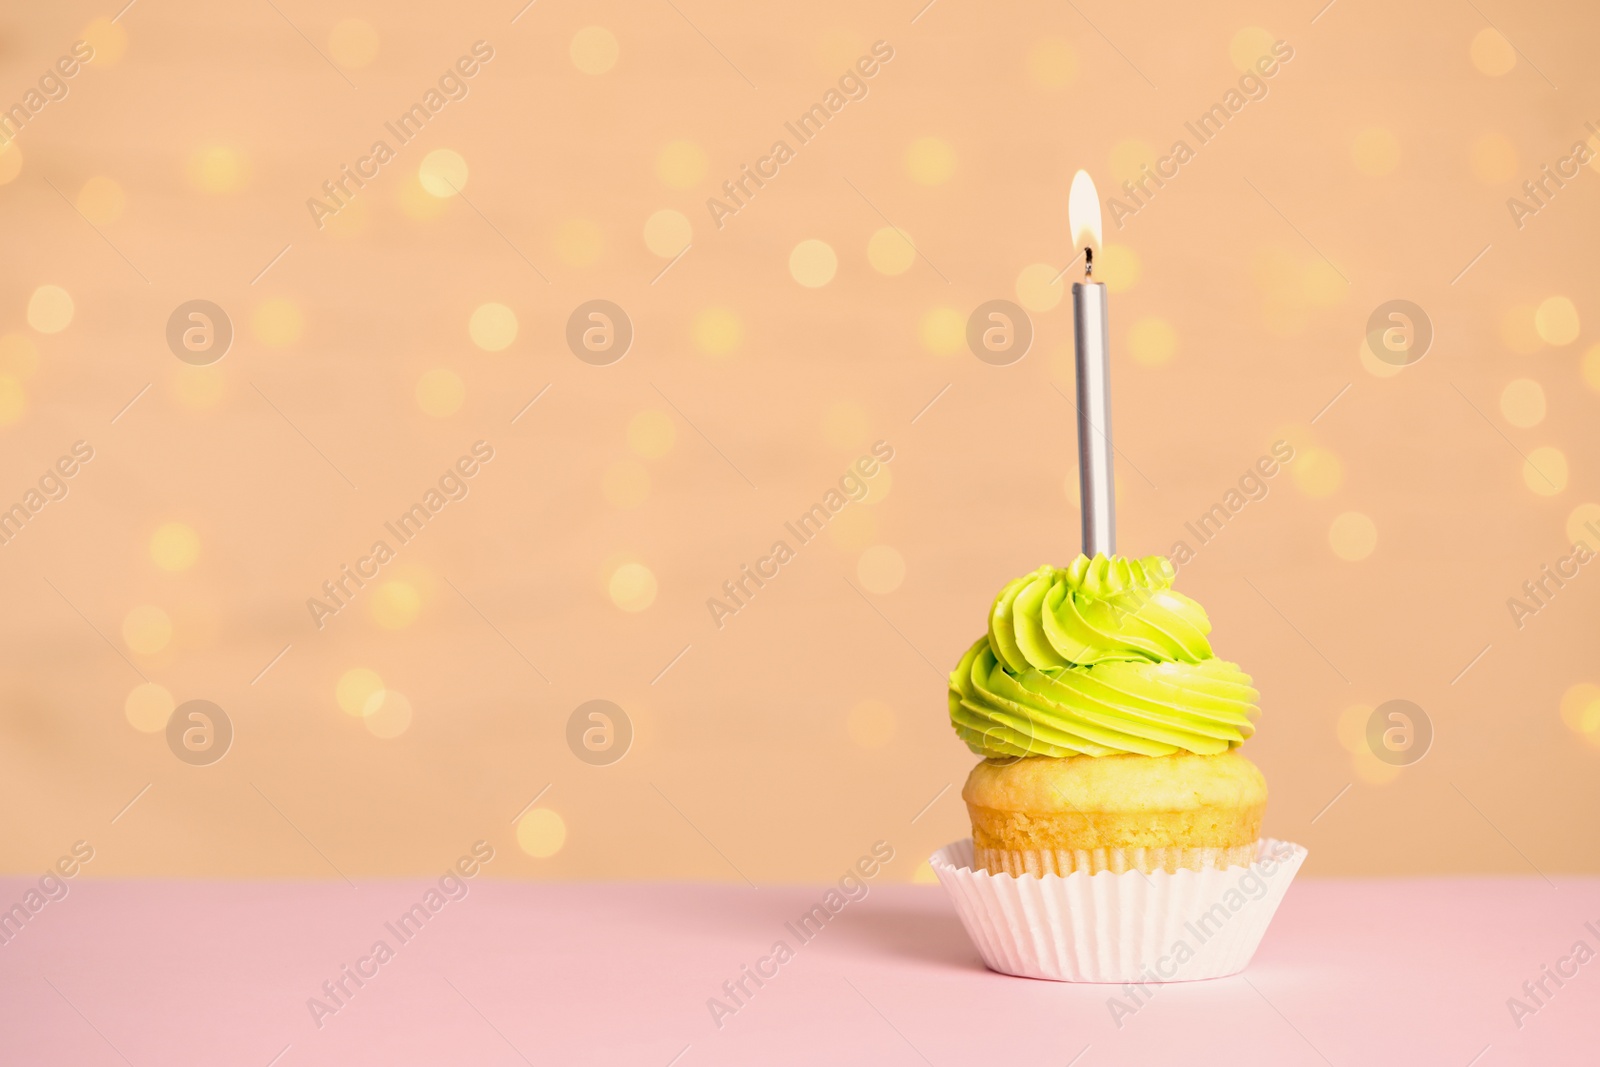 Photo of Birthday cupcake with candle on table against festive lights, space for text